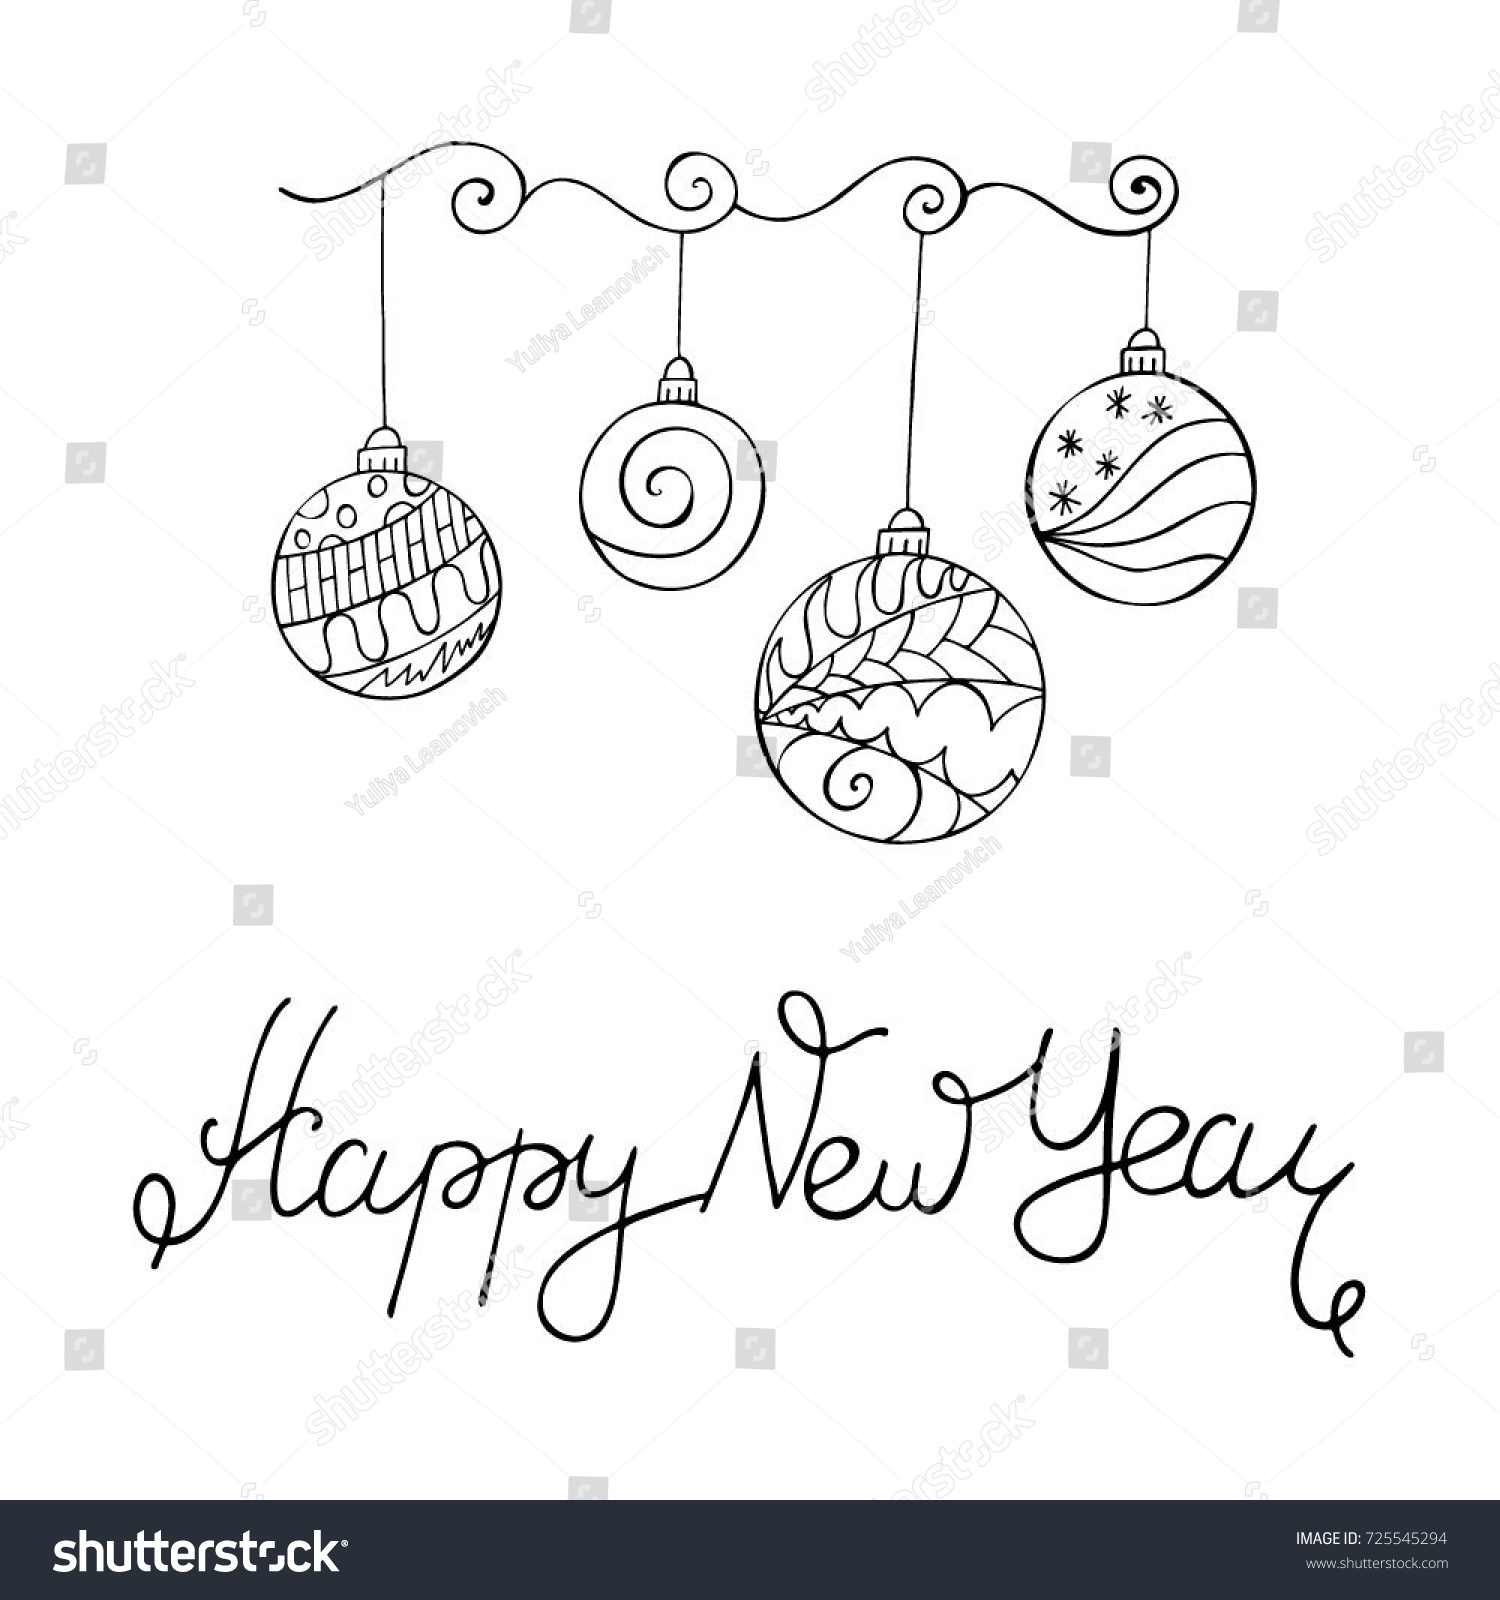 Merry Christmas card in zentangle style with word Happy New Year Vector